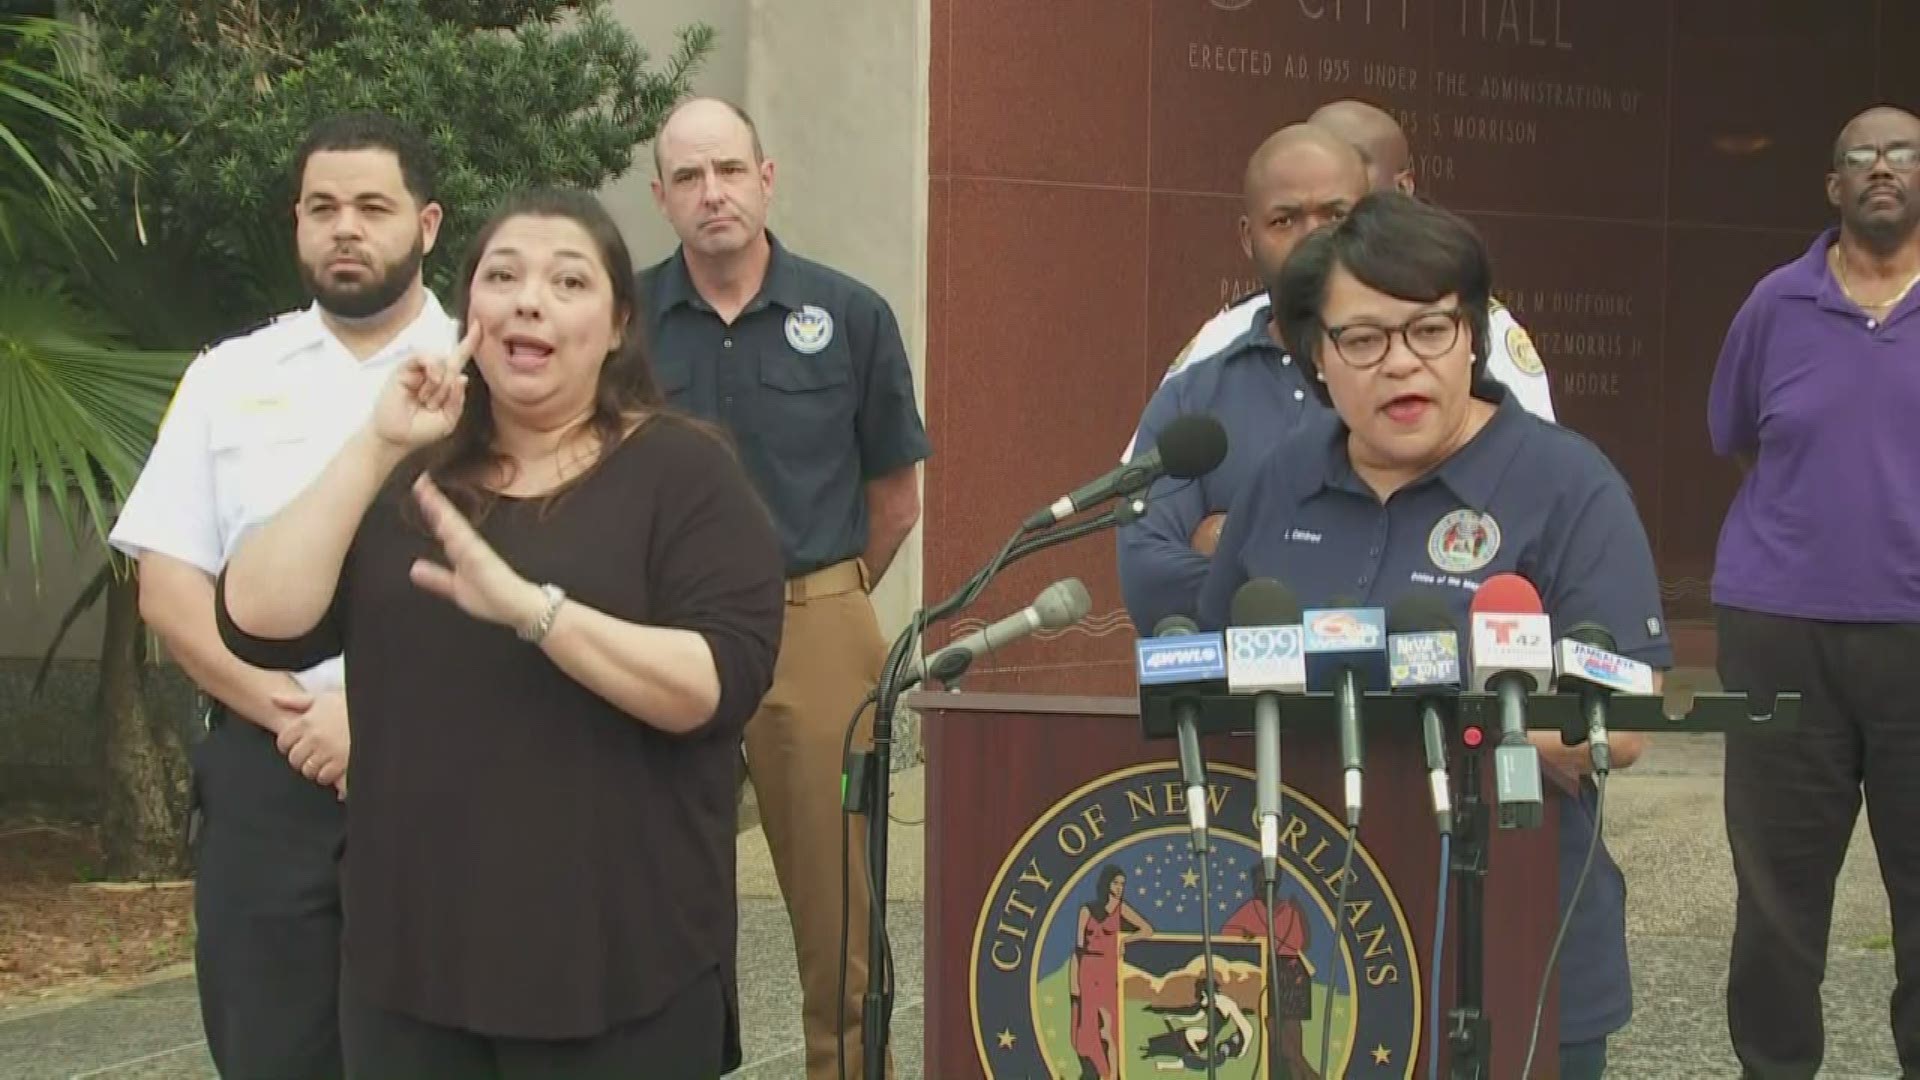 "This is a crisis," Mayor LaToya Cantrell said. "Make no mistake about it."